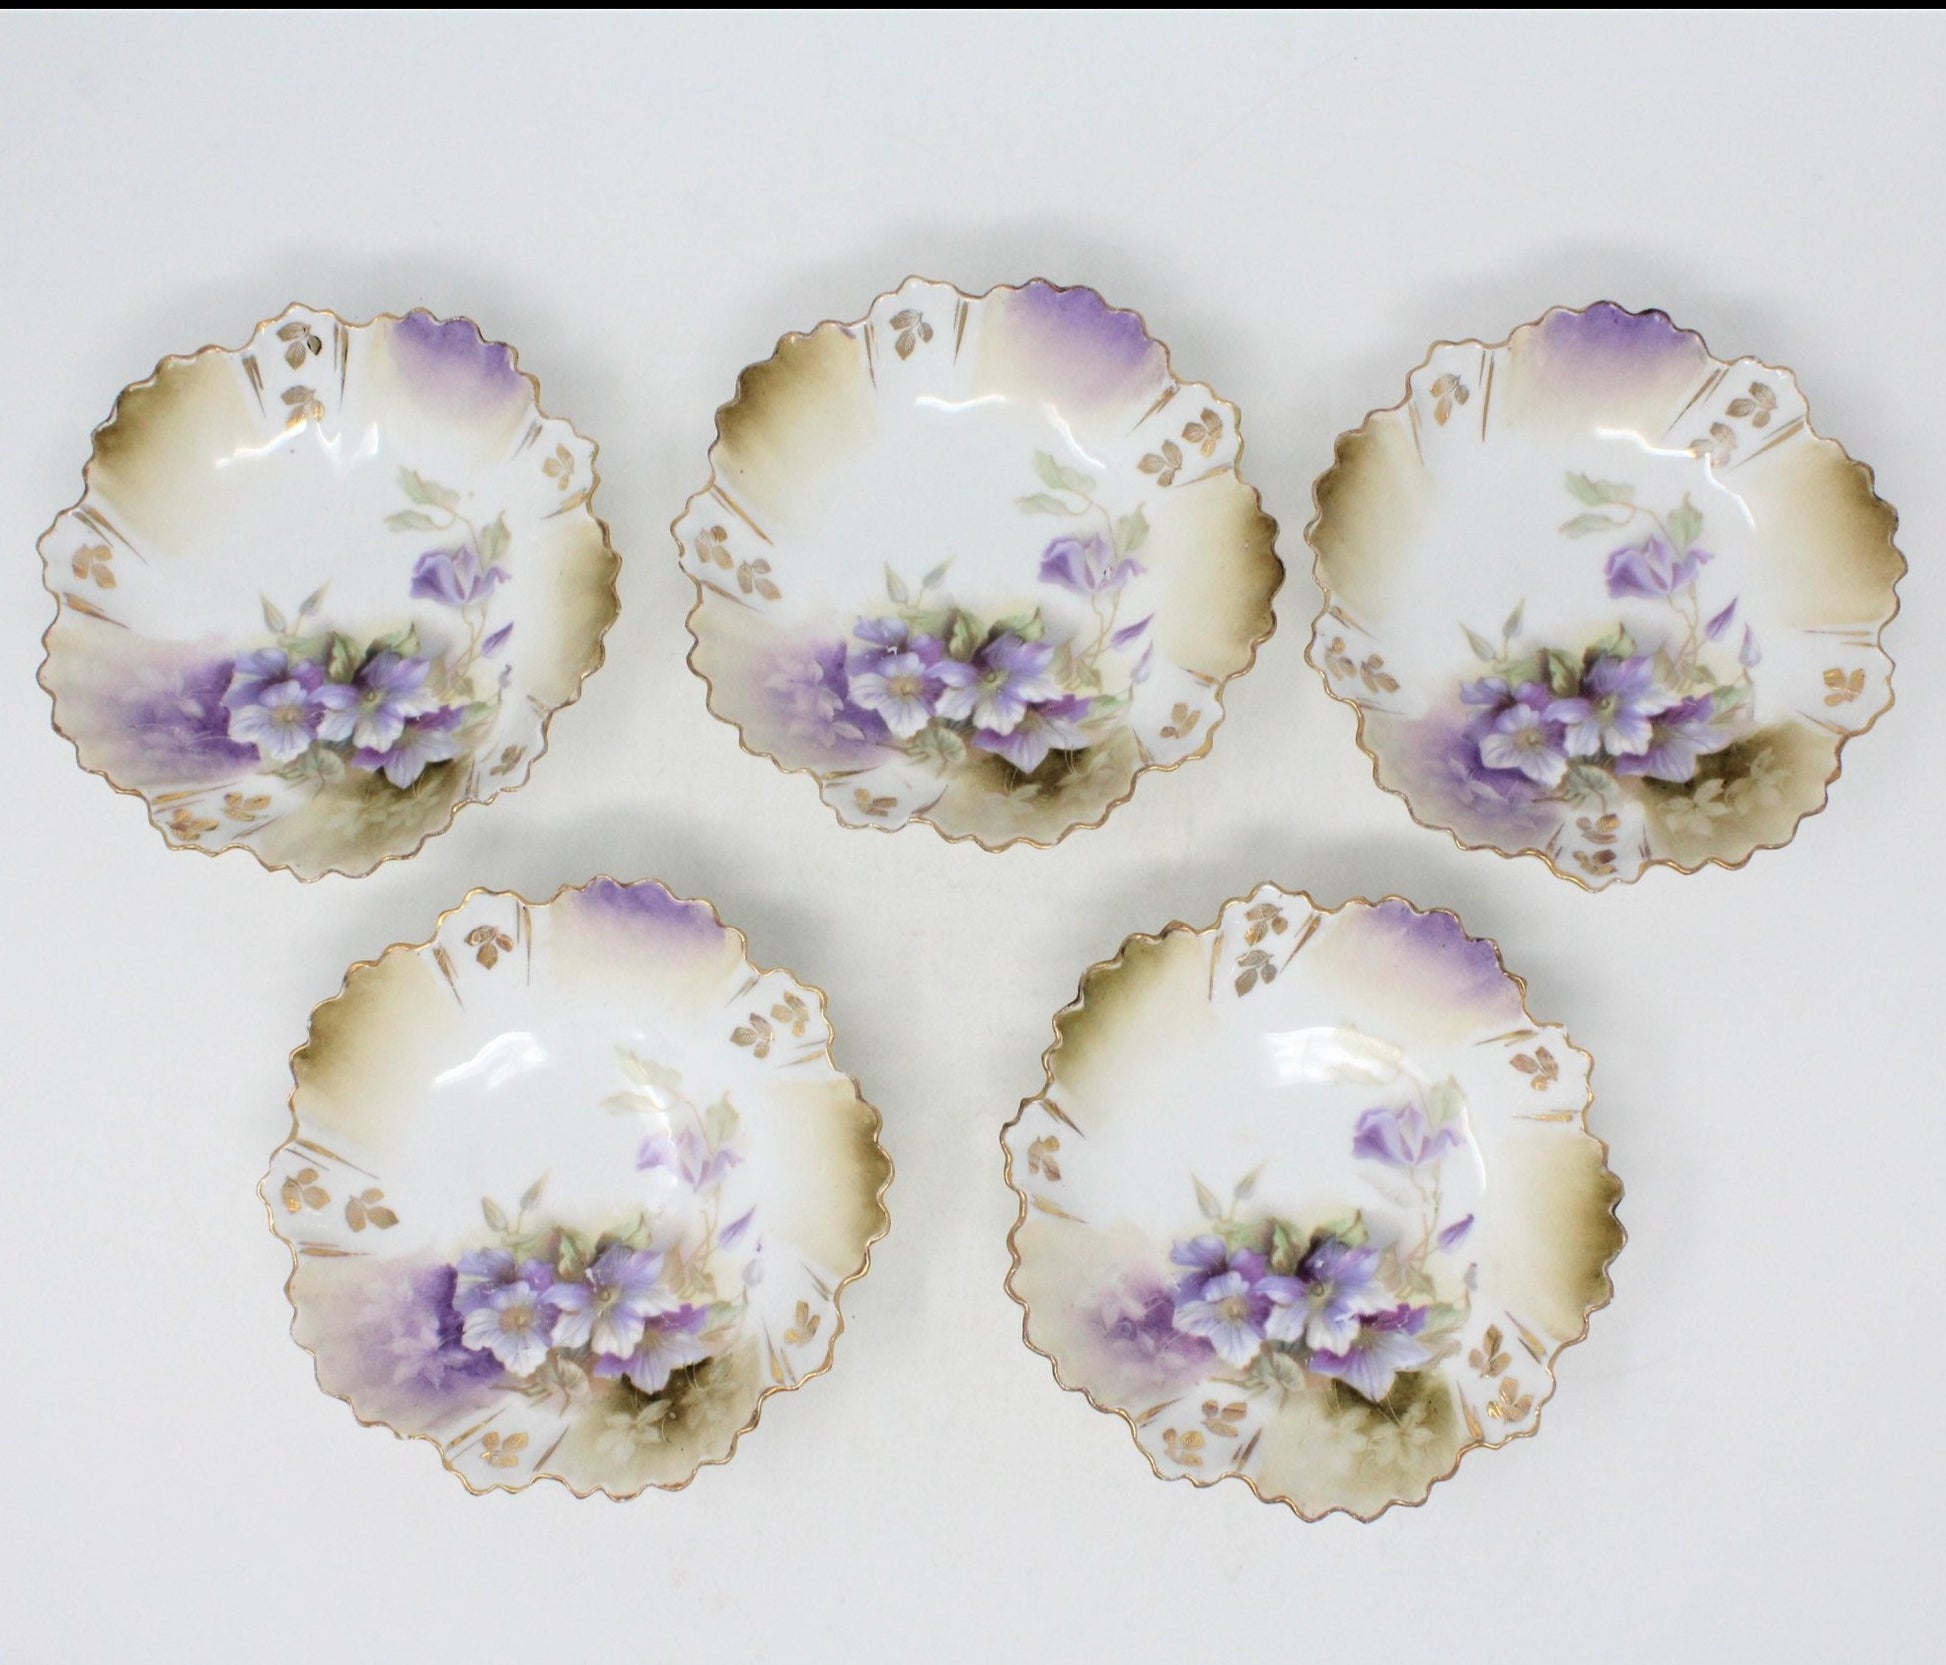 Beautiful purple flower fruit bowls, set of 5.  Antique from Germany